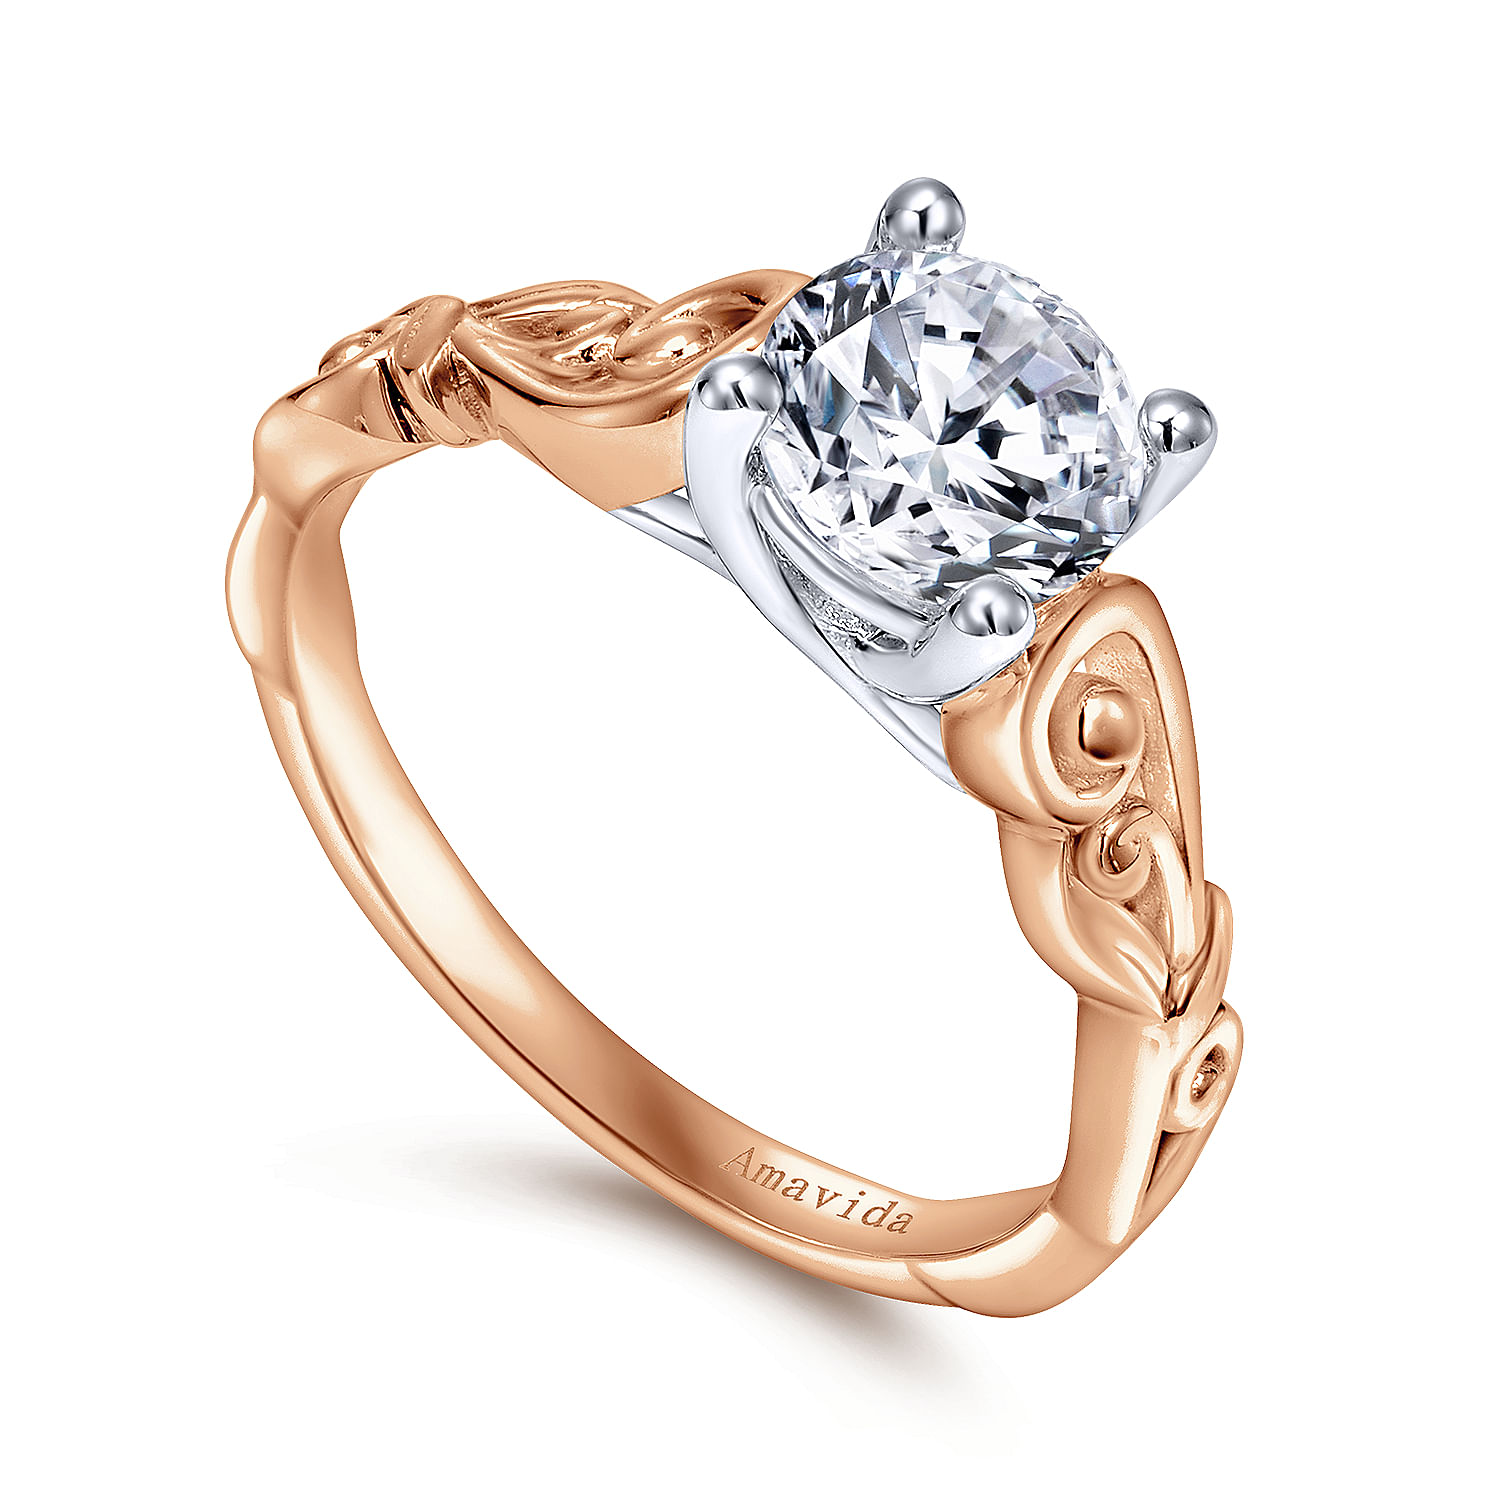 Vintage Inspired 18K White-Rose Gold Round Solitaire Engagement Ring